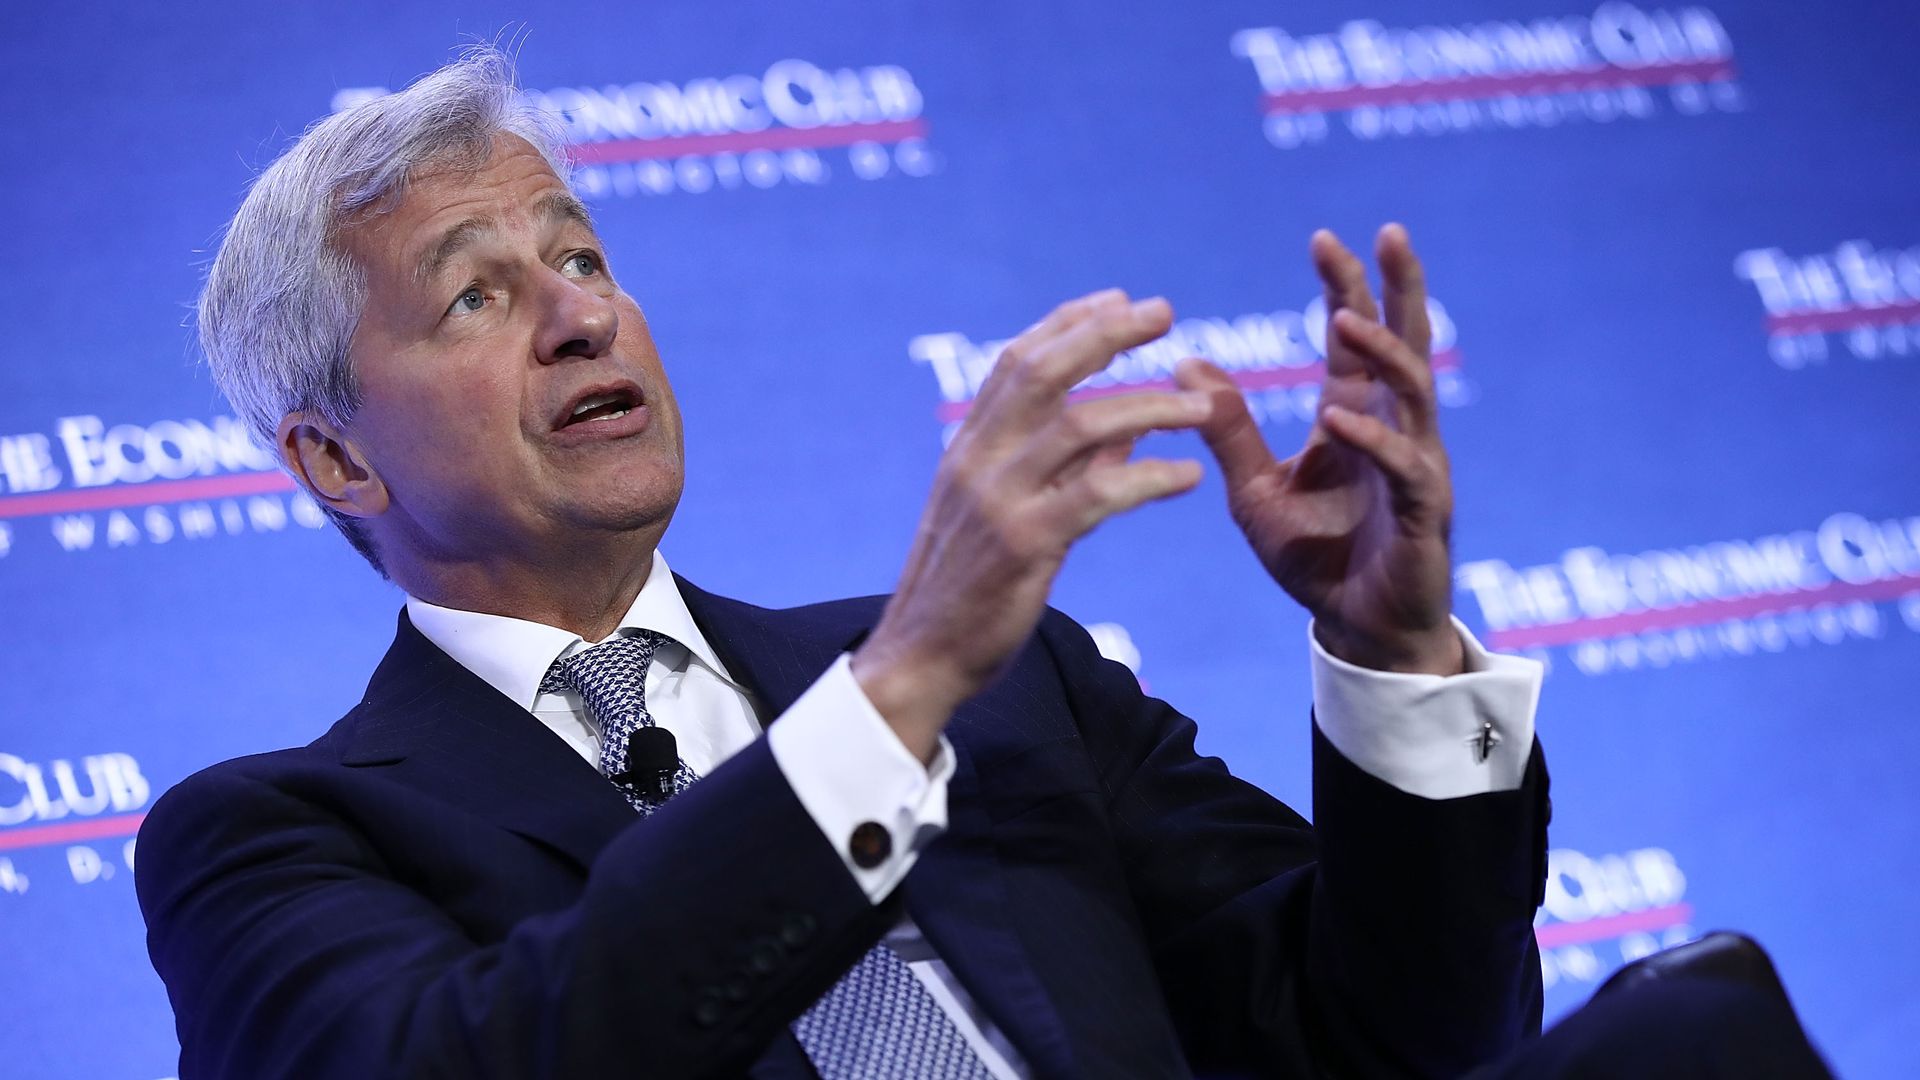 JPMorgan Chase CEO Jamie Dimon speaks at an event.